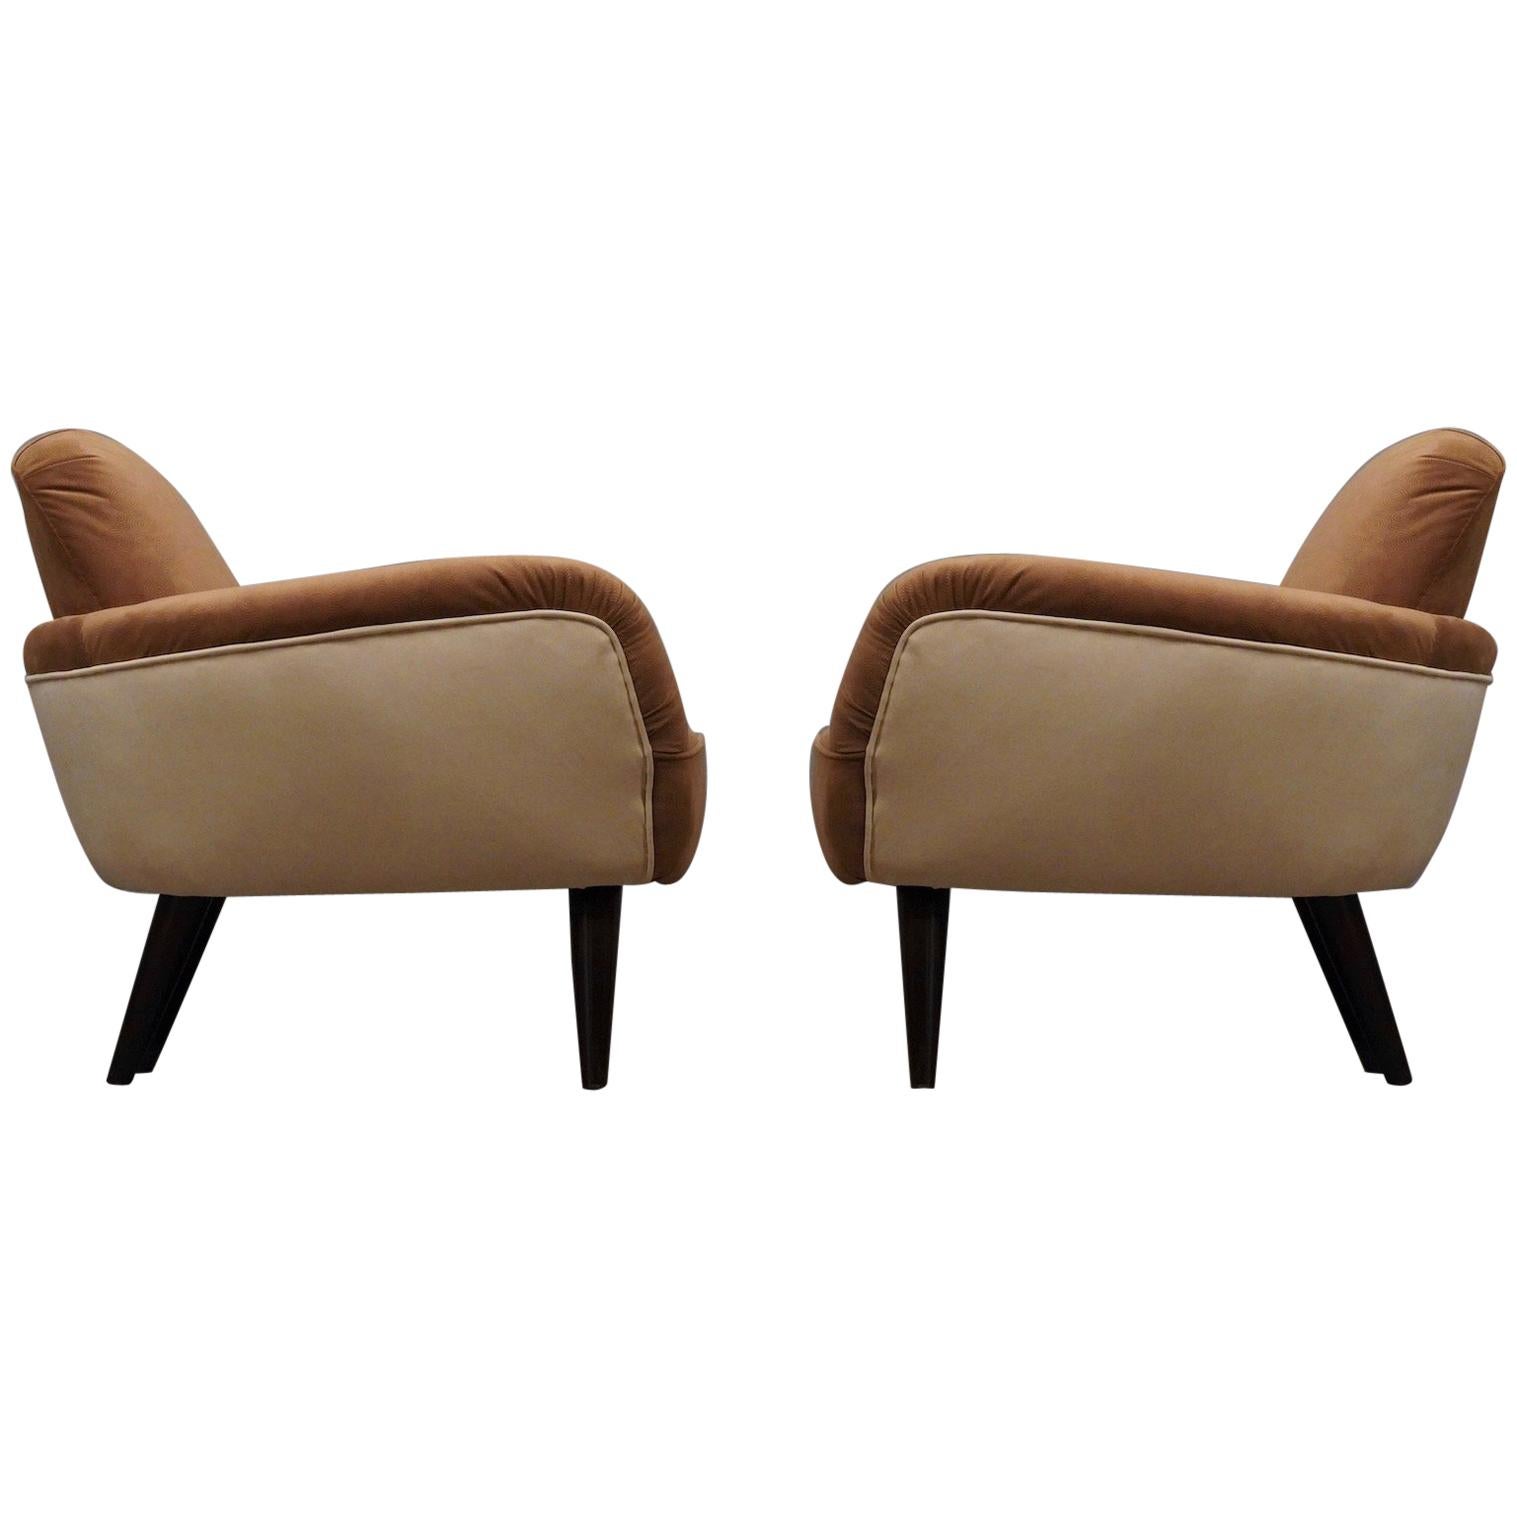 Pair of Art Deco Brown and Withe Italian Armchairs, 1940